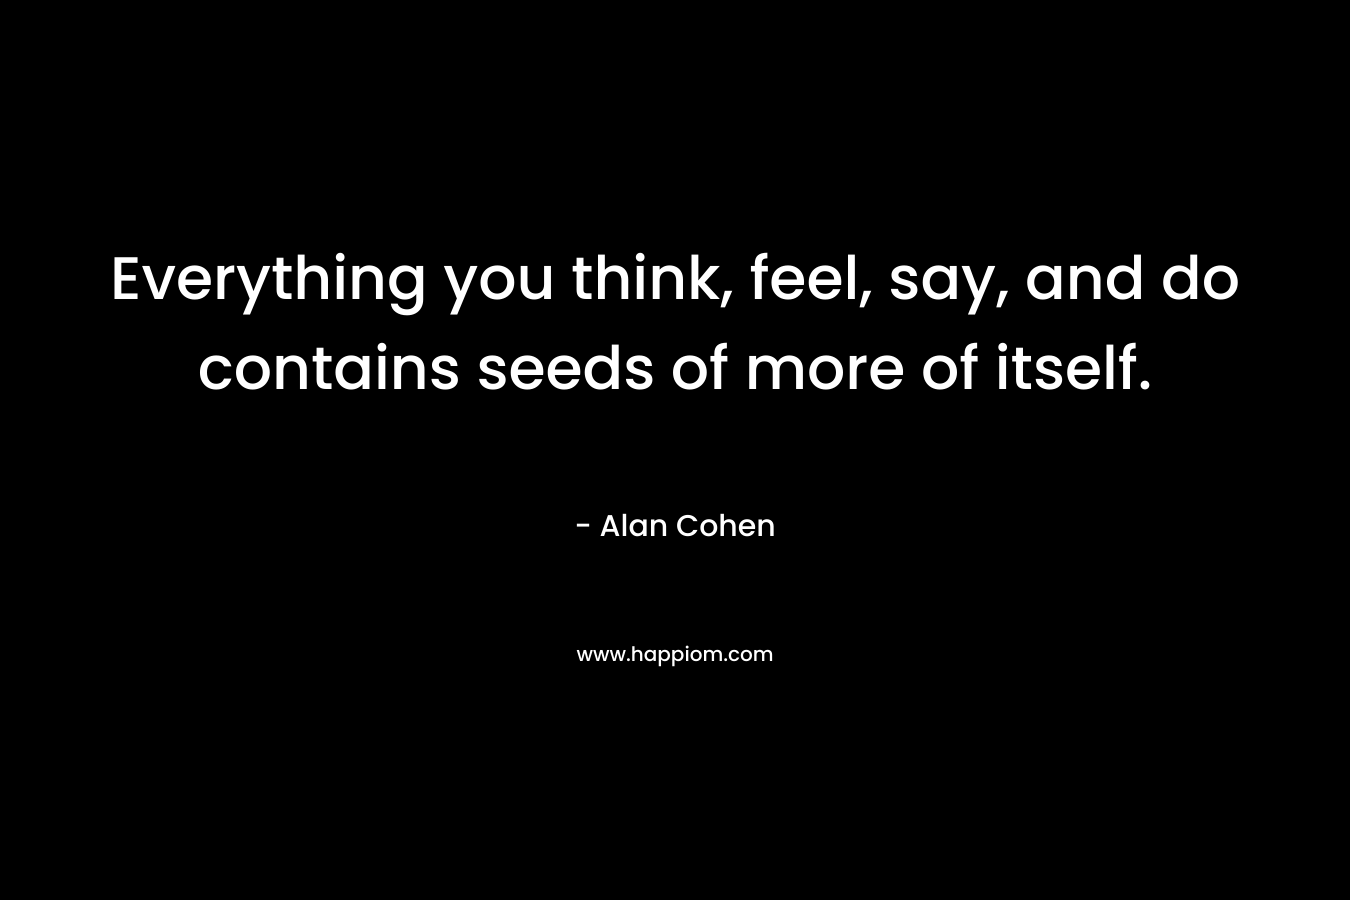 Everything you think, feel, say, and do contains seeds of more of itself. – Alan Cohen